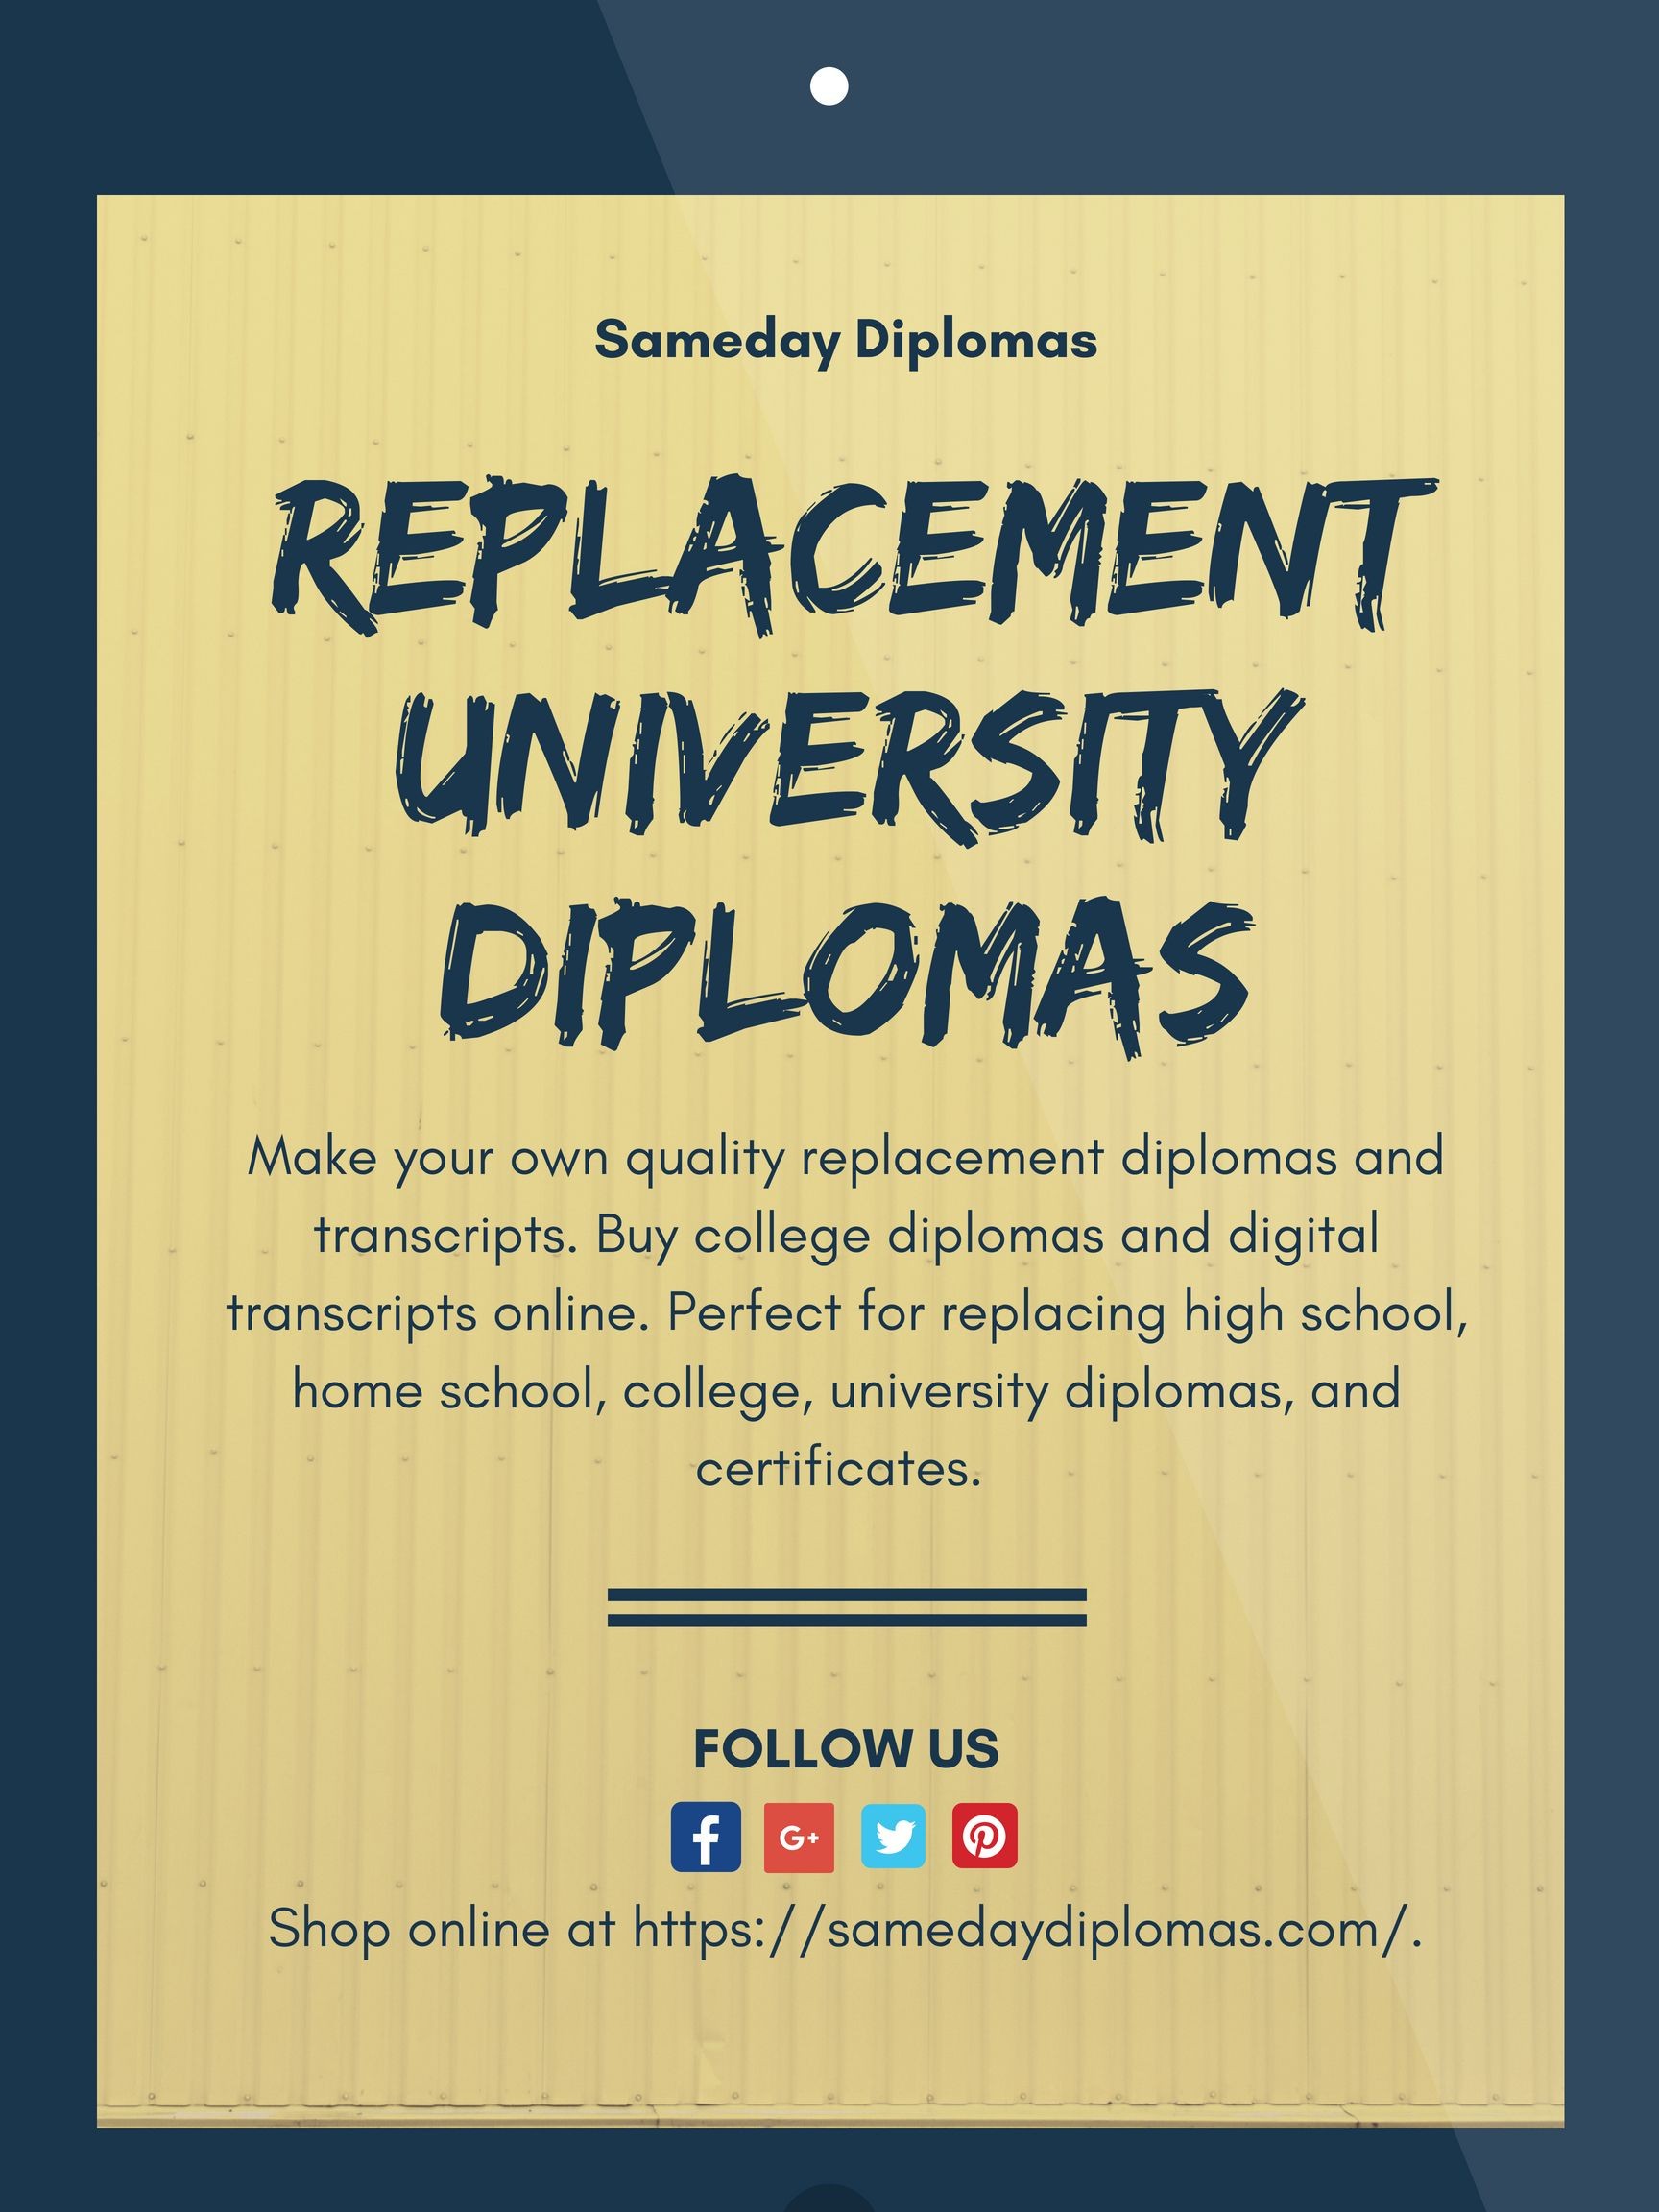 Lost Or Damaged Your Certificate Get Replacement Of University Make Own Diploma